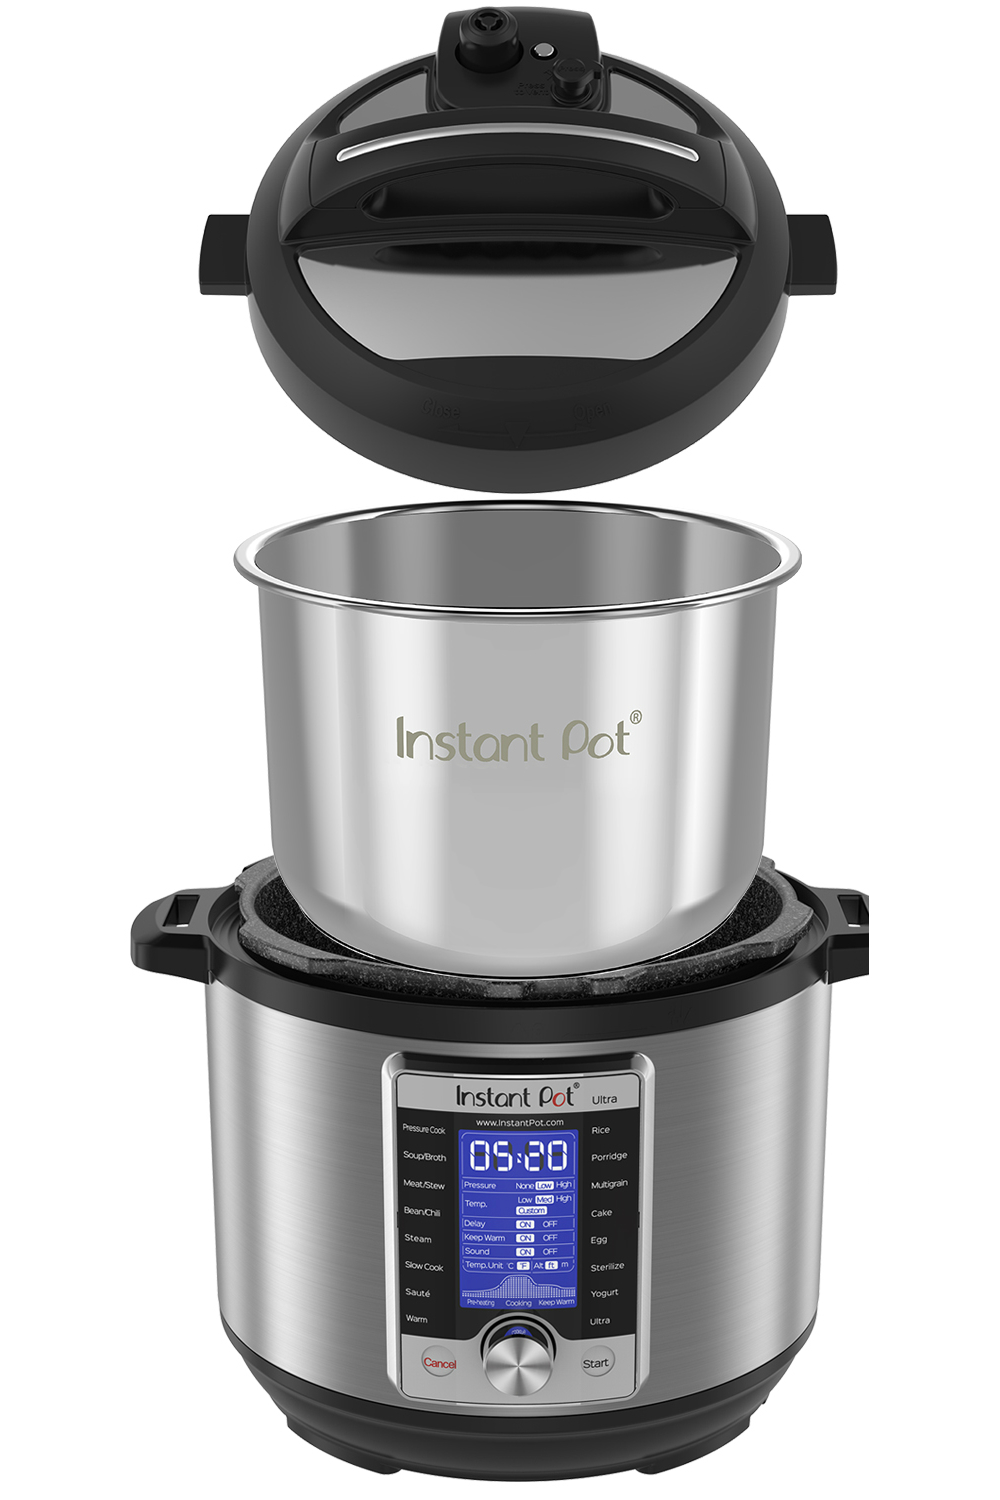 Instant Pot on X: IT'S ON!! The Instant Pot Ultra Sale - STARTING AT  $99.96 - NOW at @Sur_La_Table 🙌 Includes #InstantPot Ultra models 3QT, 6  QT and 8 QT *HURRY 